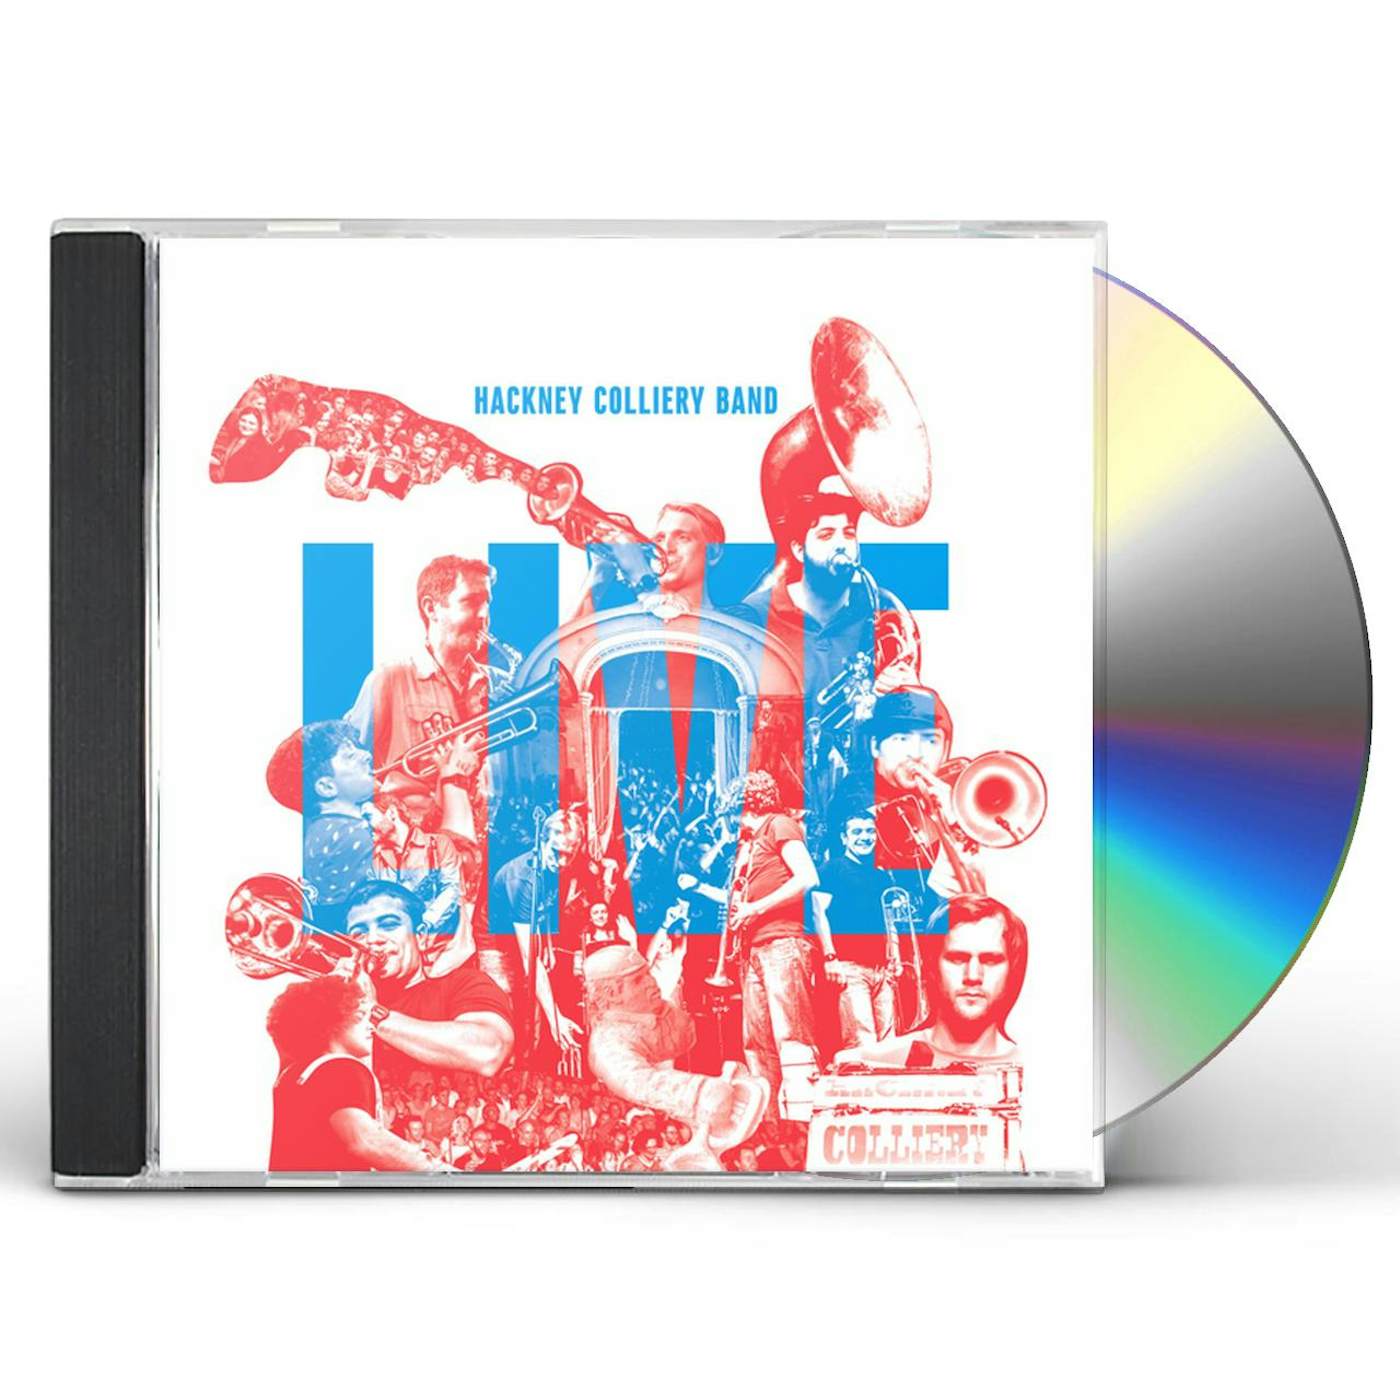 Hackney Colliery Band LIVE CD